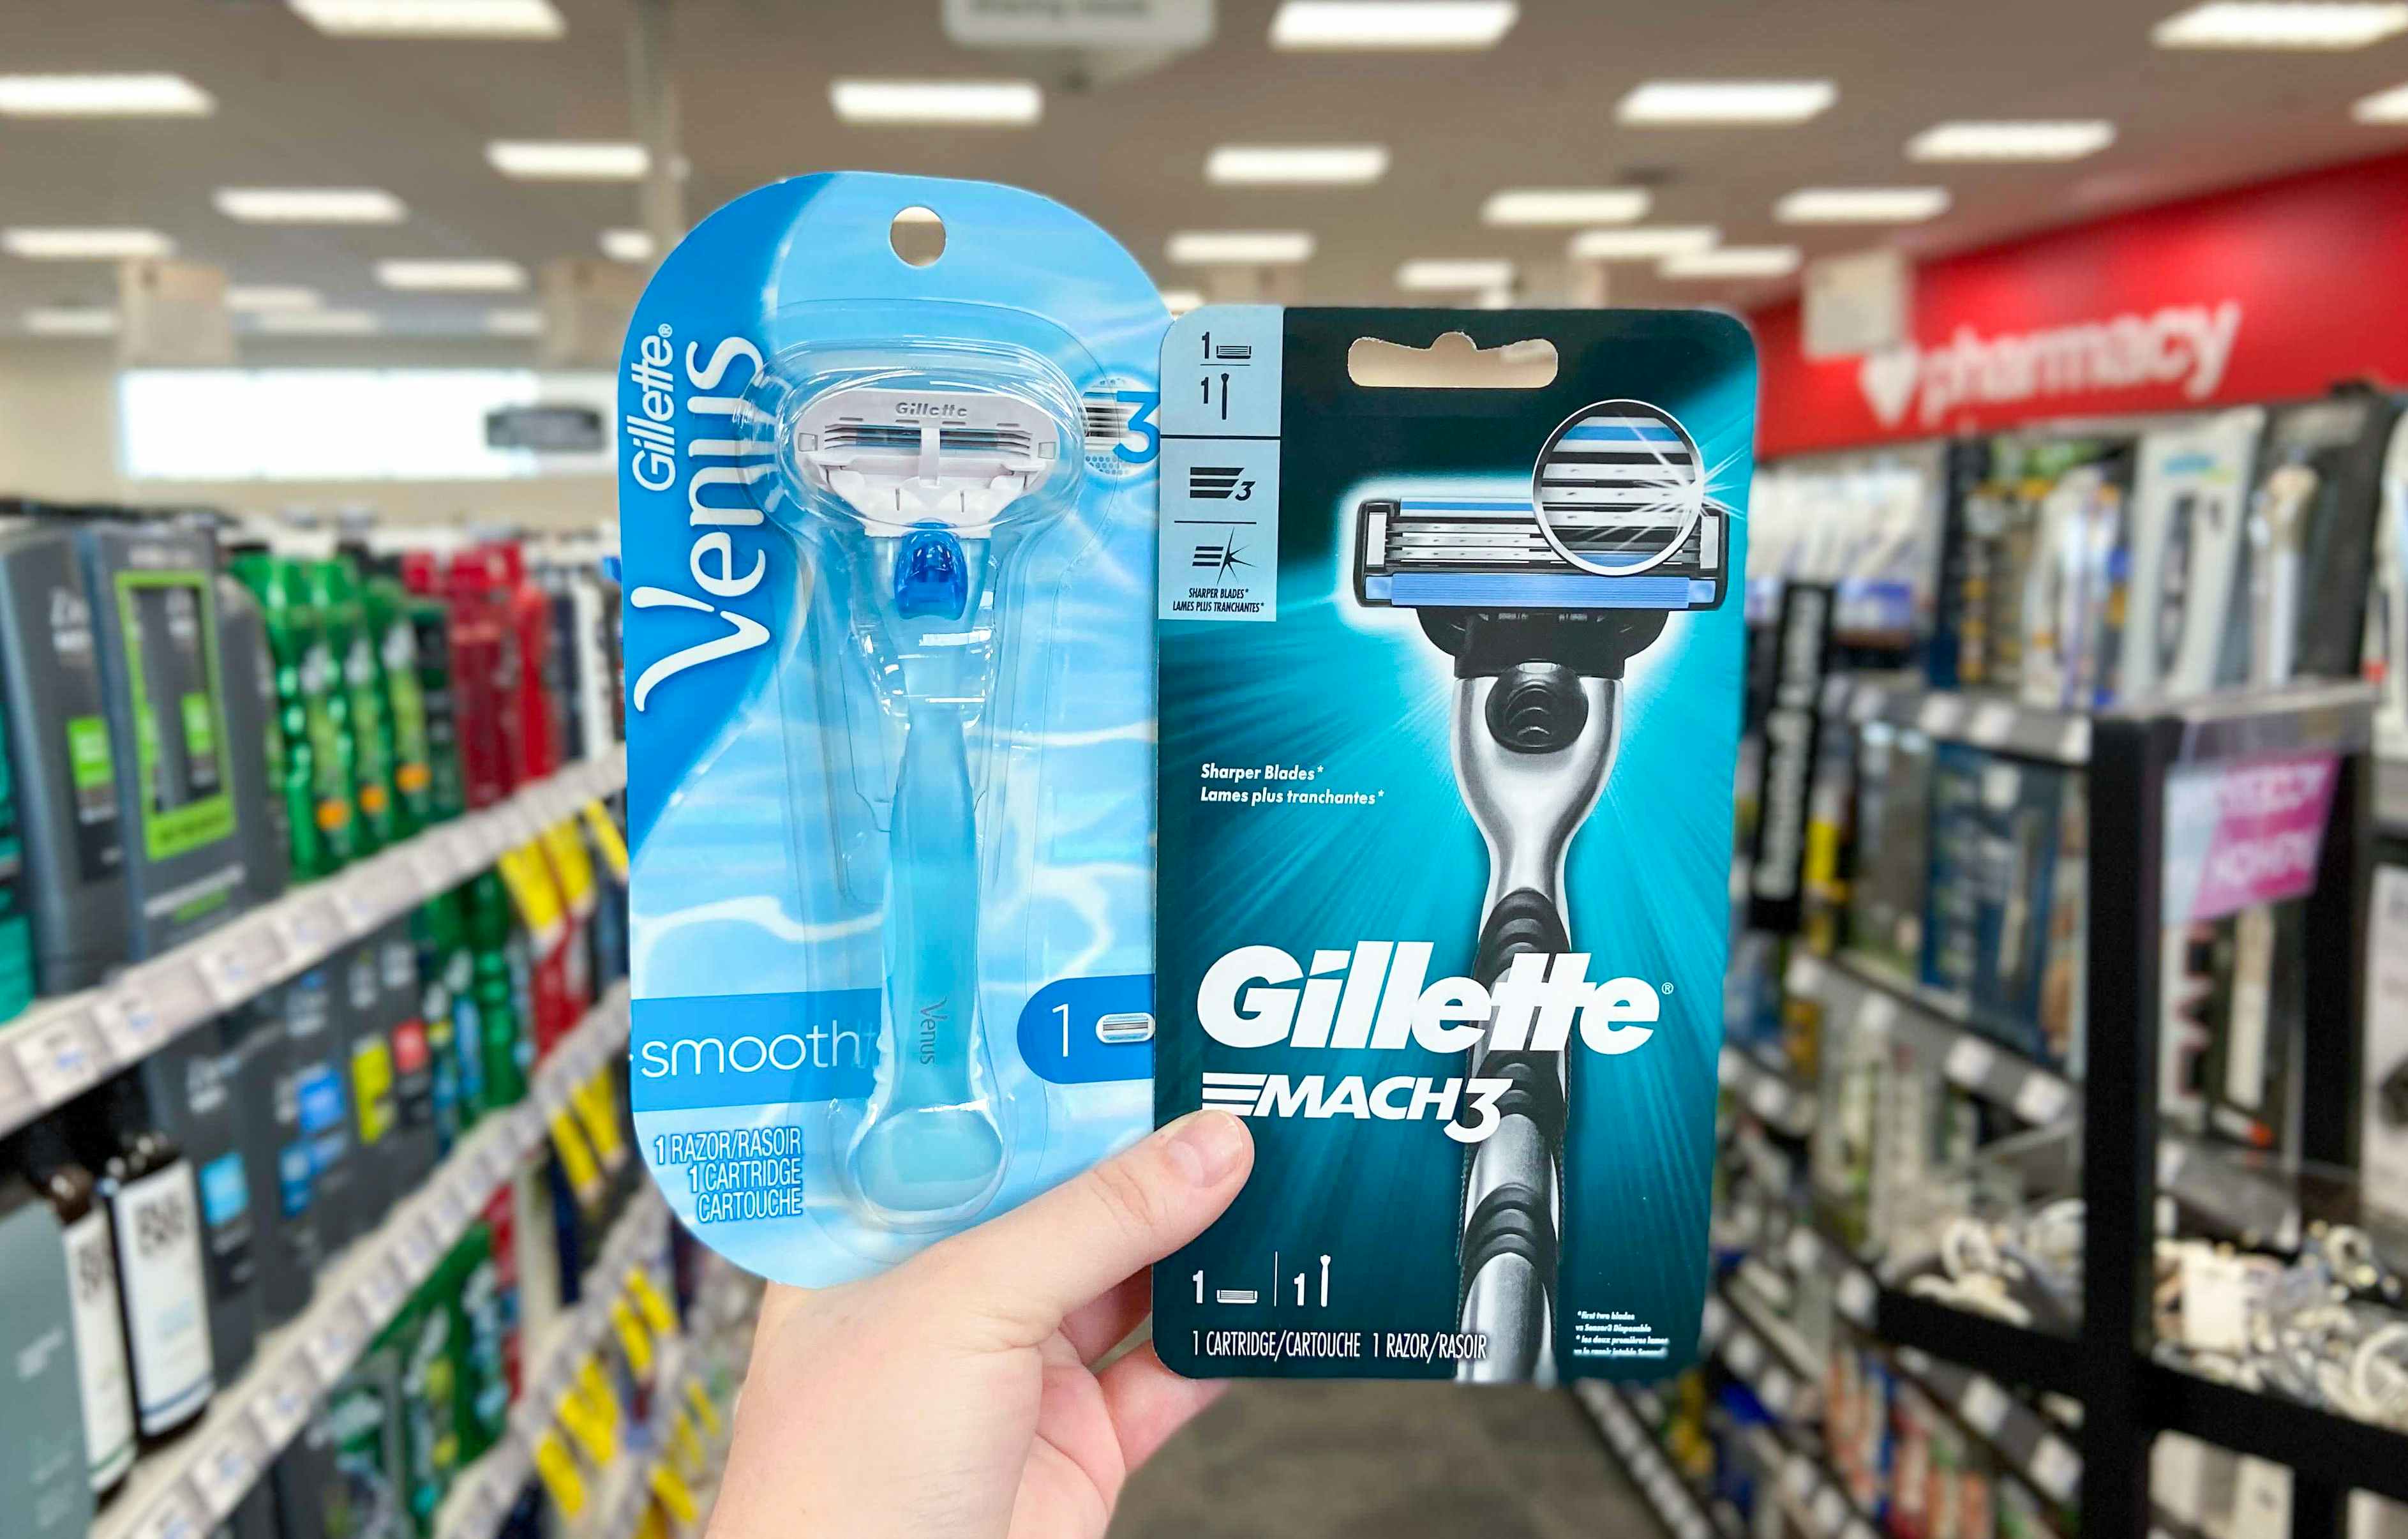 A person's hand holding up two reusable Gillette razors in front of an aisle at a store. One is a Venus women's smooth razor and the other is a Mach 3 men's razor.